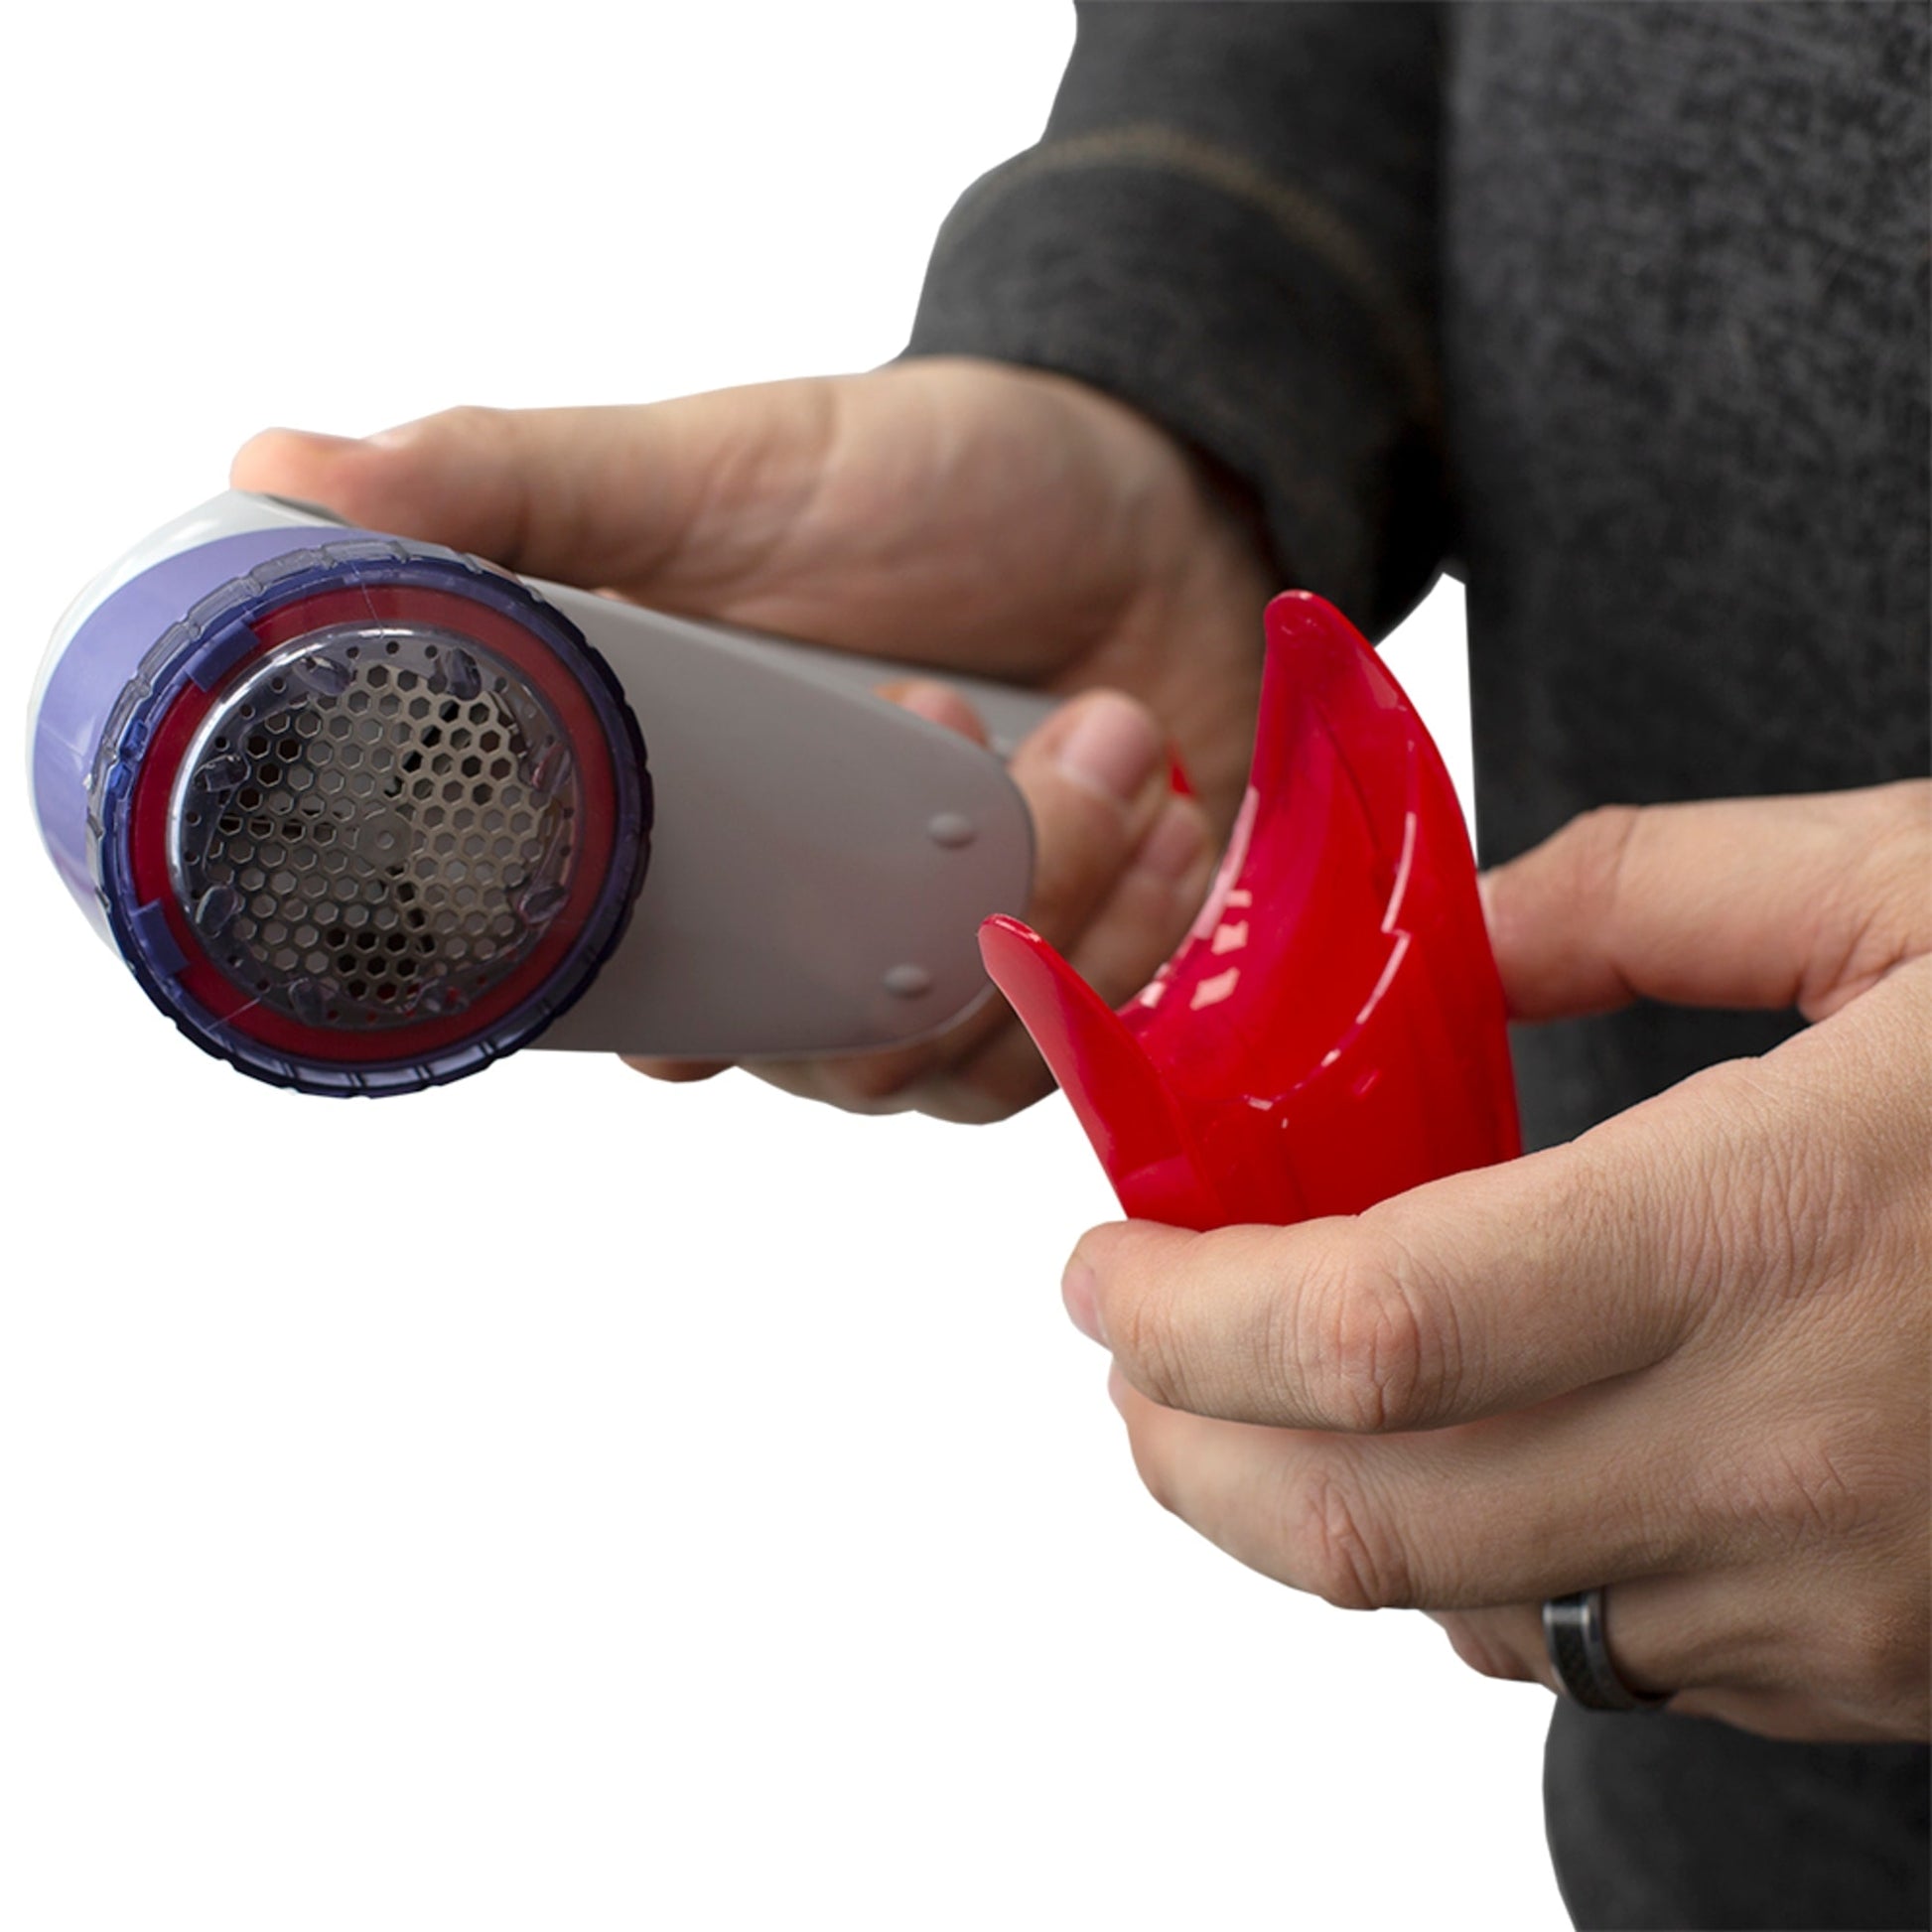 LintHero™ - Portable Lint Remover - Homewhis